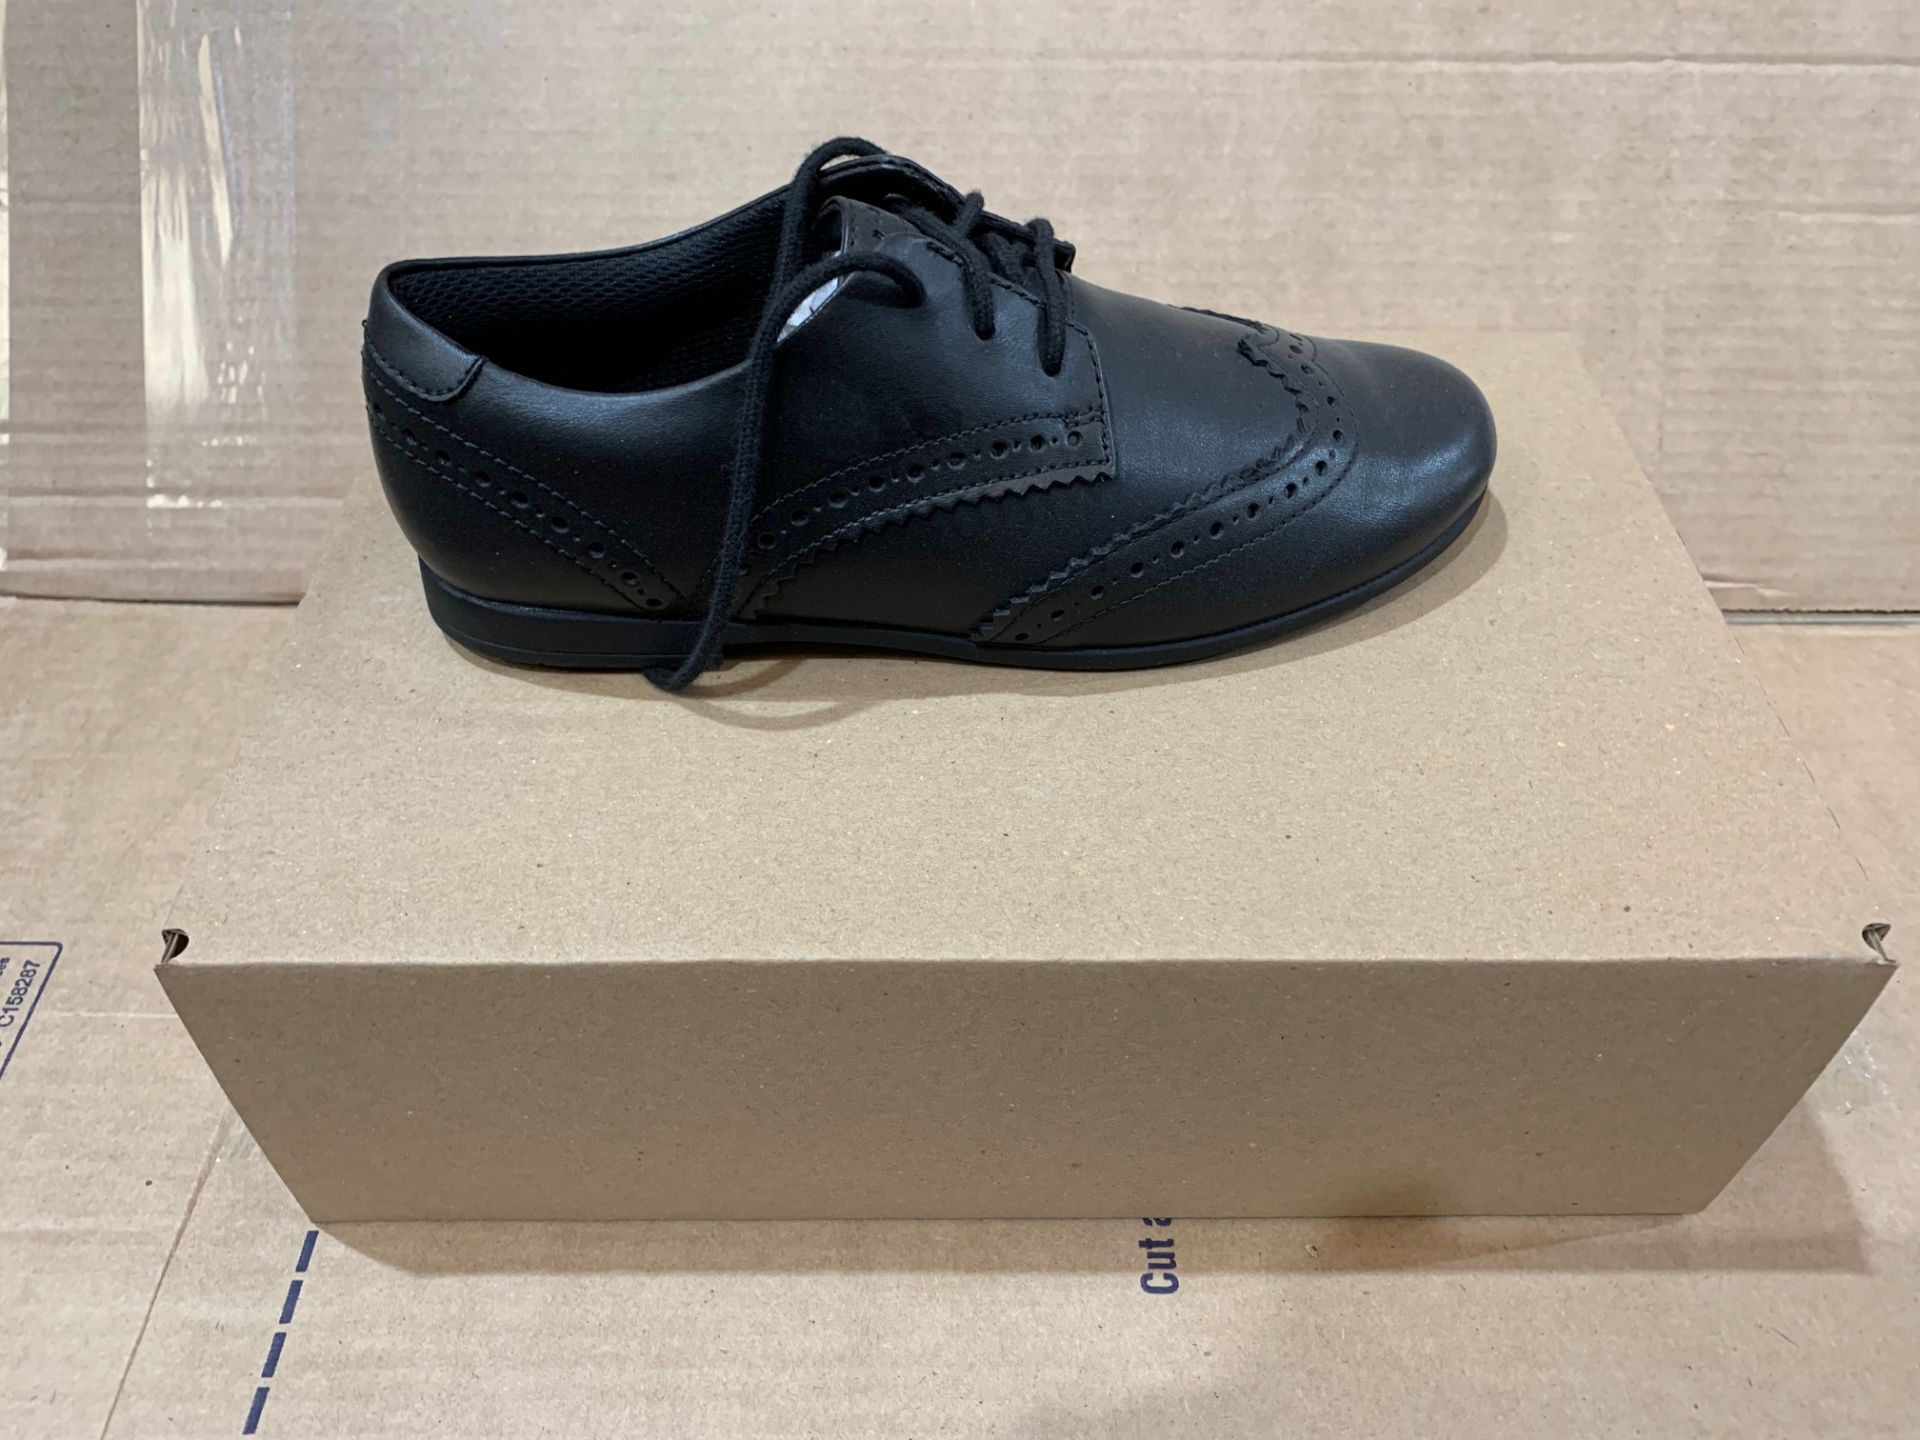 1 X NEW & BOXED CLARKS SHOES PG417101 SIZE 3